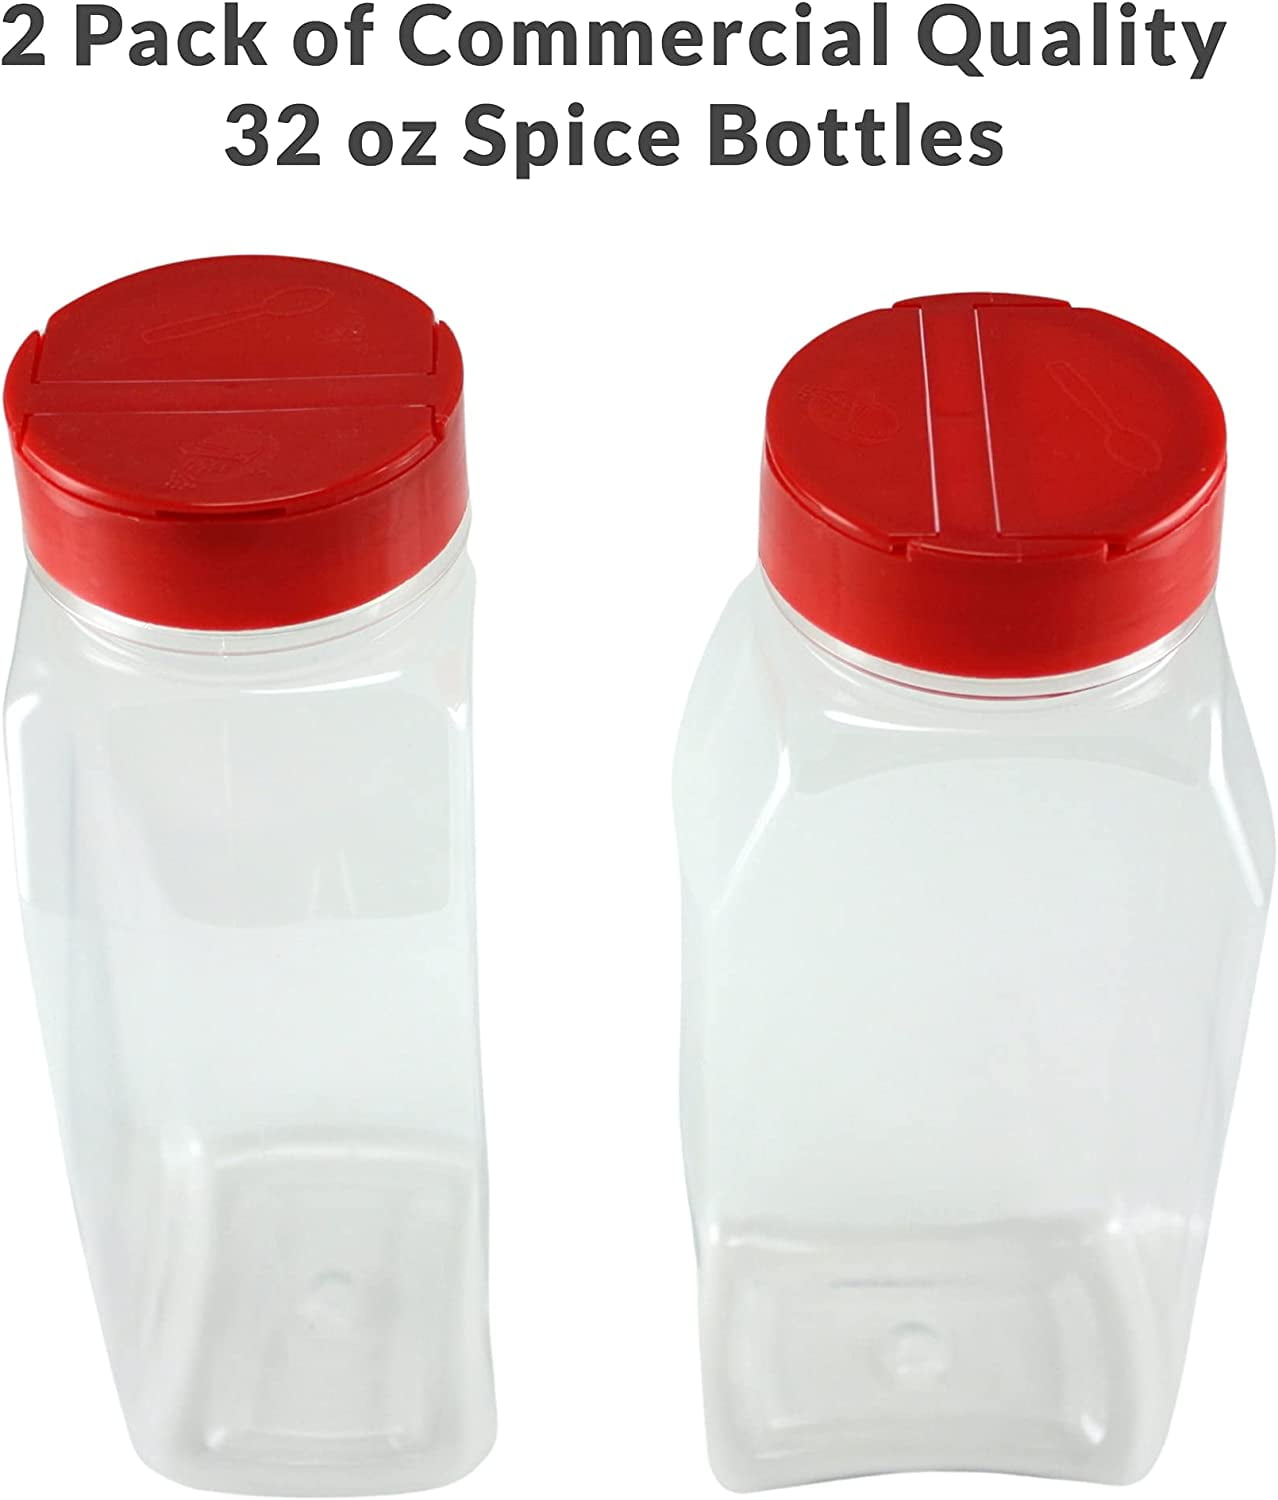 Skyway Supreme Large 16 OZ Clear Plastic Spice Bottles Seasoning Containers  Jars - Set of 2 - Flap Cap with Pour and Sifter Spice Shaker - Durable